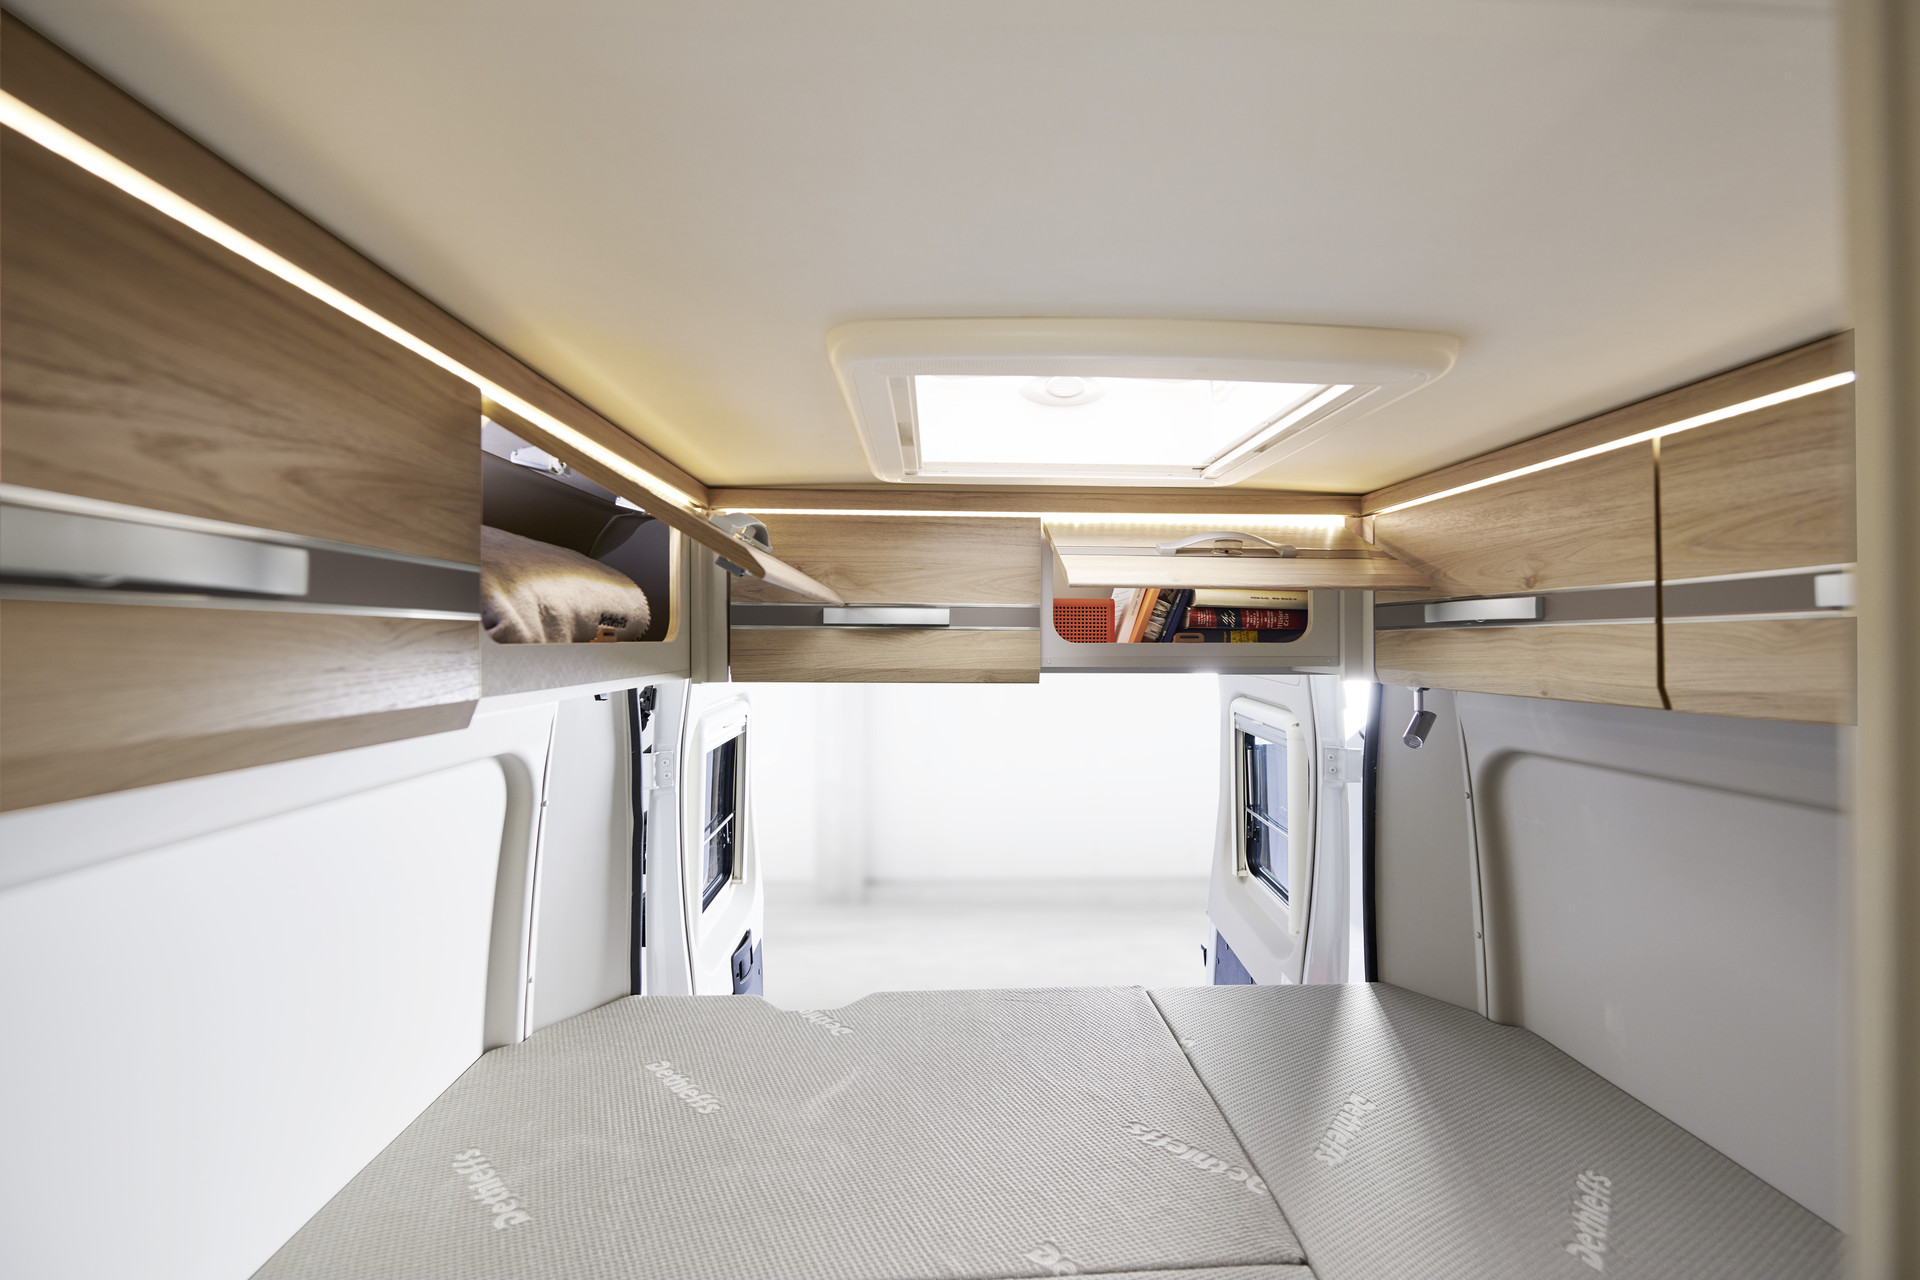 The standard overhead lockers above the rear doors create additional storage space and have indirect lighting.